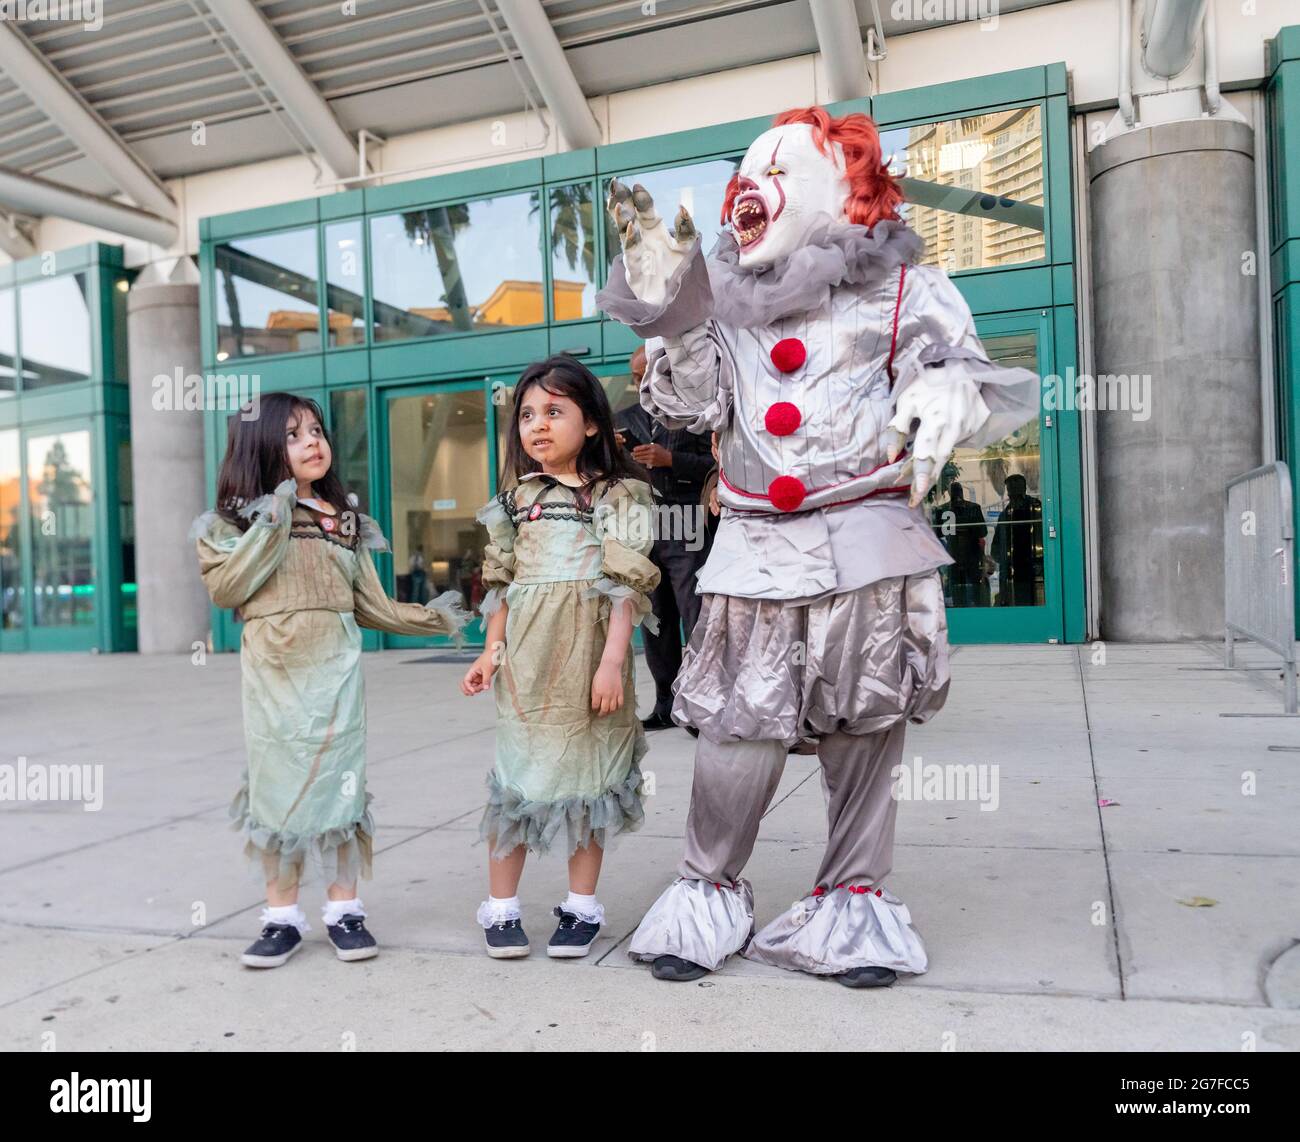 An attendee dressed as Pennywise the Dancing Clown poses with two little girls in costumes at Comic Con in Los Angeles, CA, United States Stock Photo